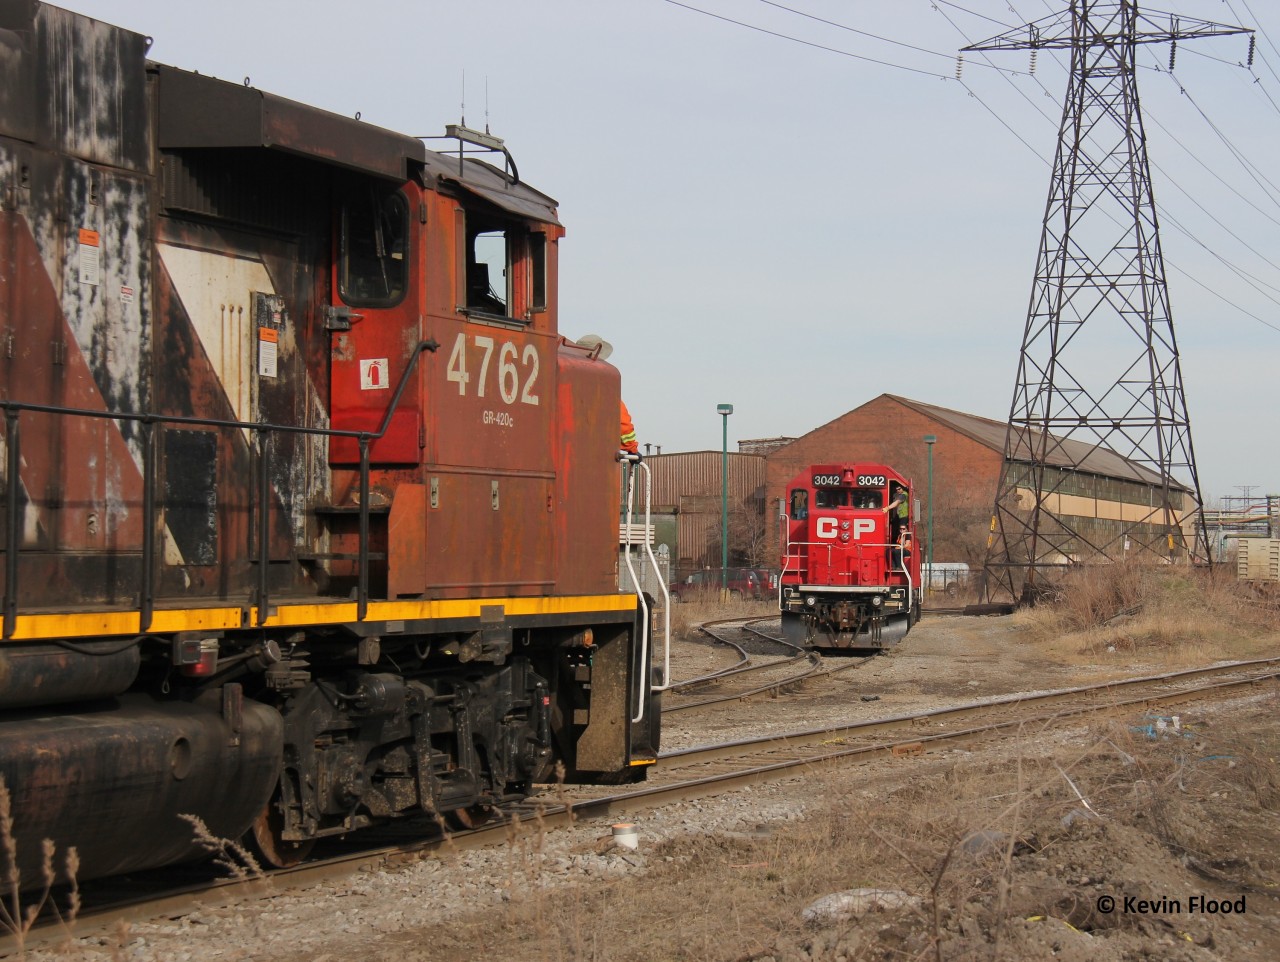 The CN and CP north end Hamilton industrial jobs meet just east of the Ottawa St. crossing on a spring late afternoon just over a year ago. The crew members on both trains give each other some friendly greetings, as the CP job pauses to let the CN job go through.